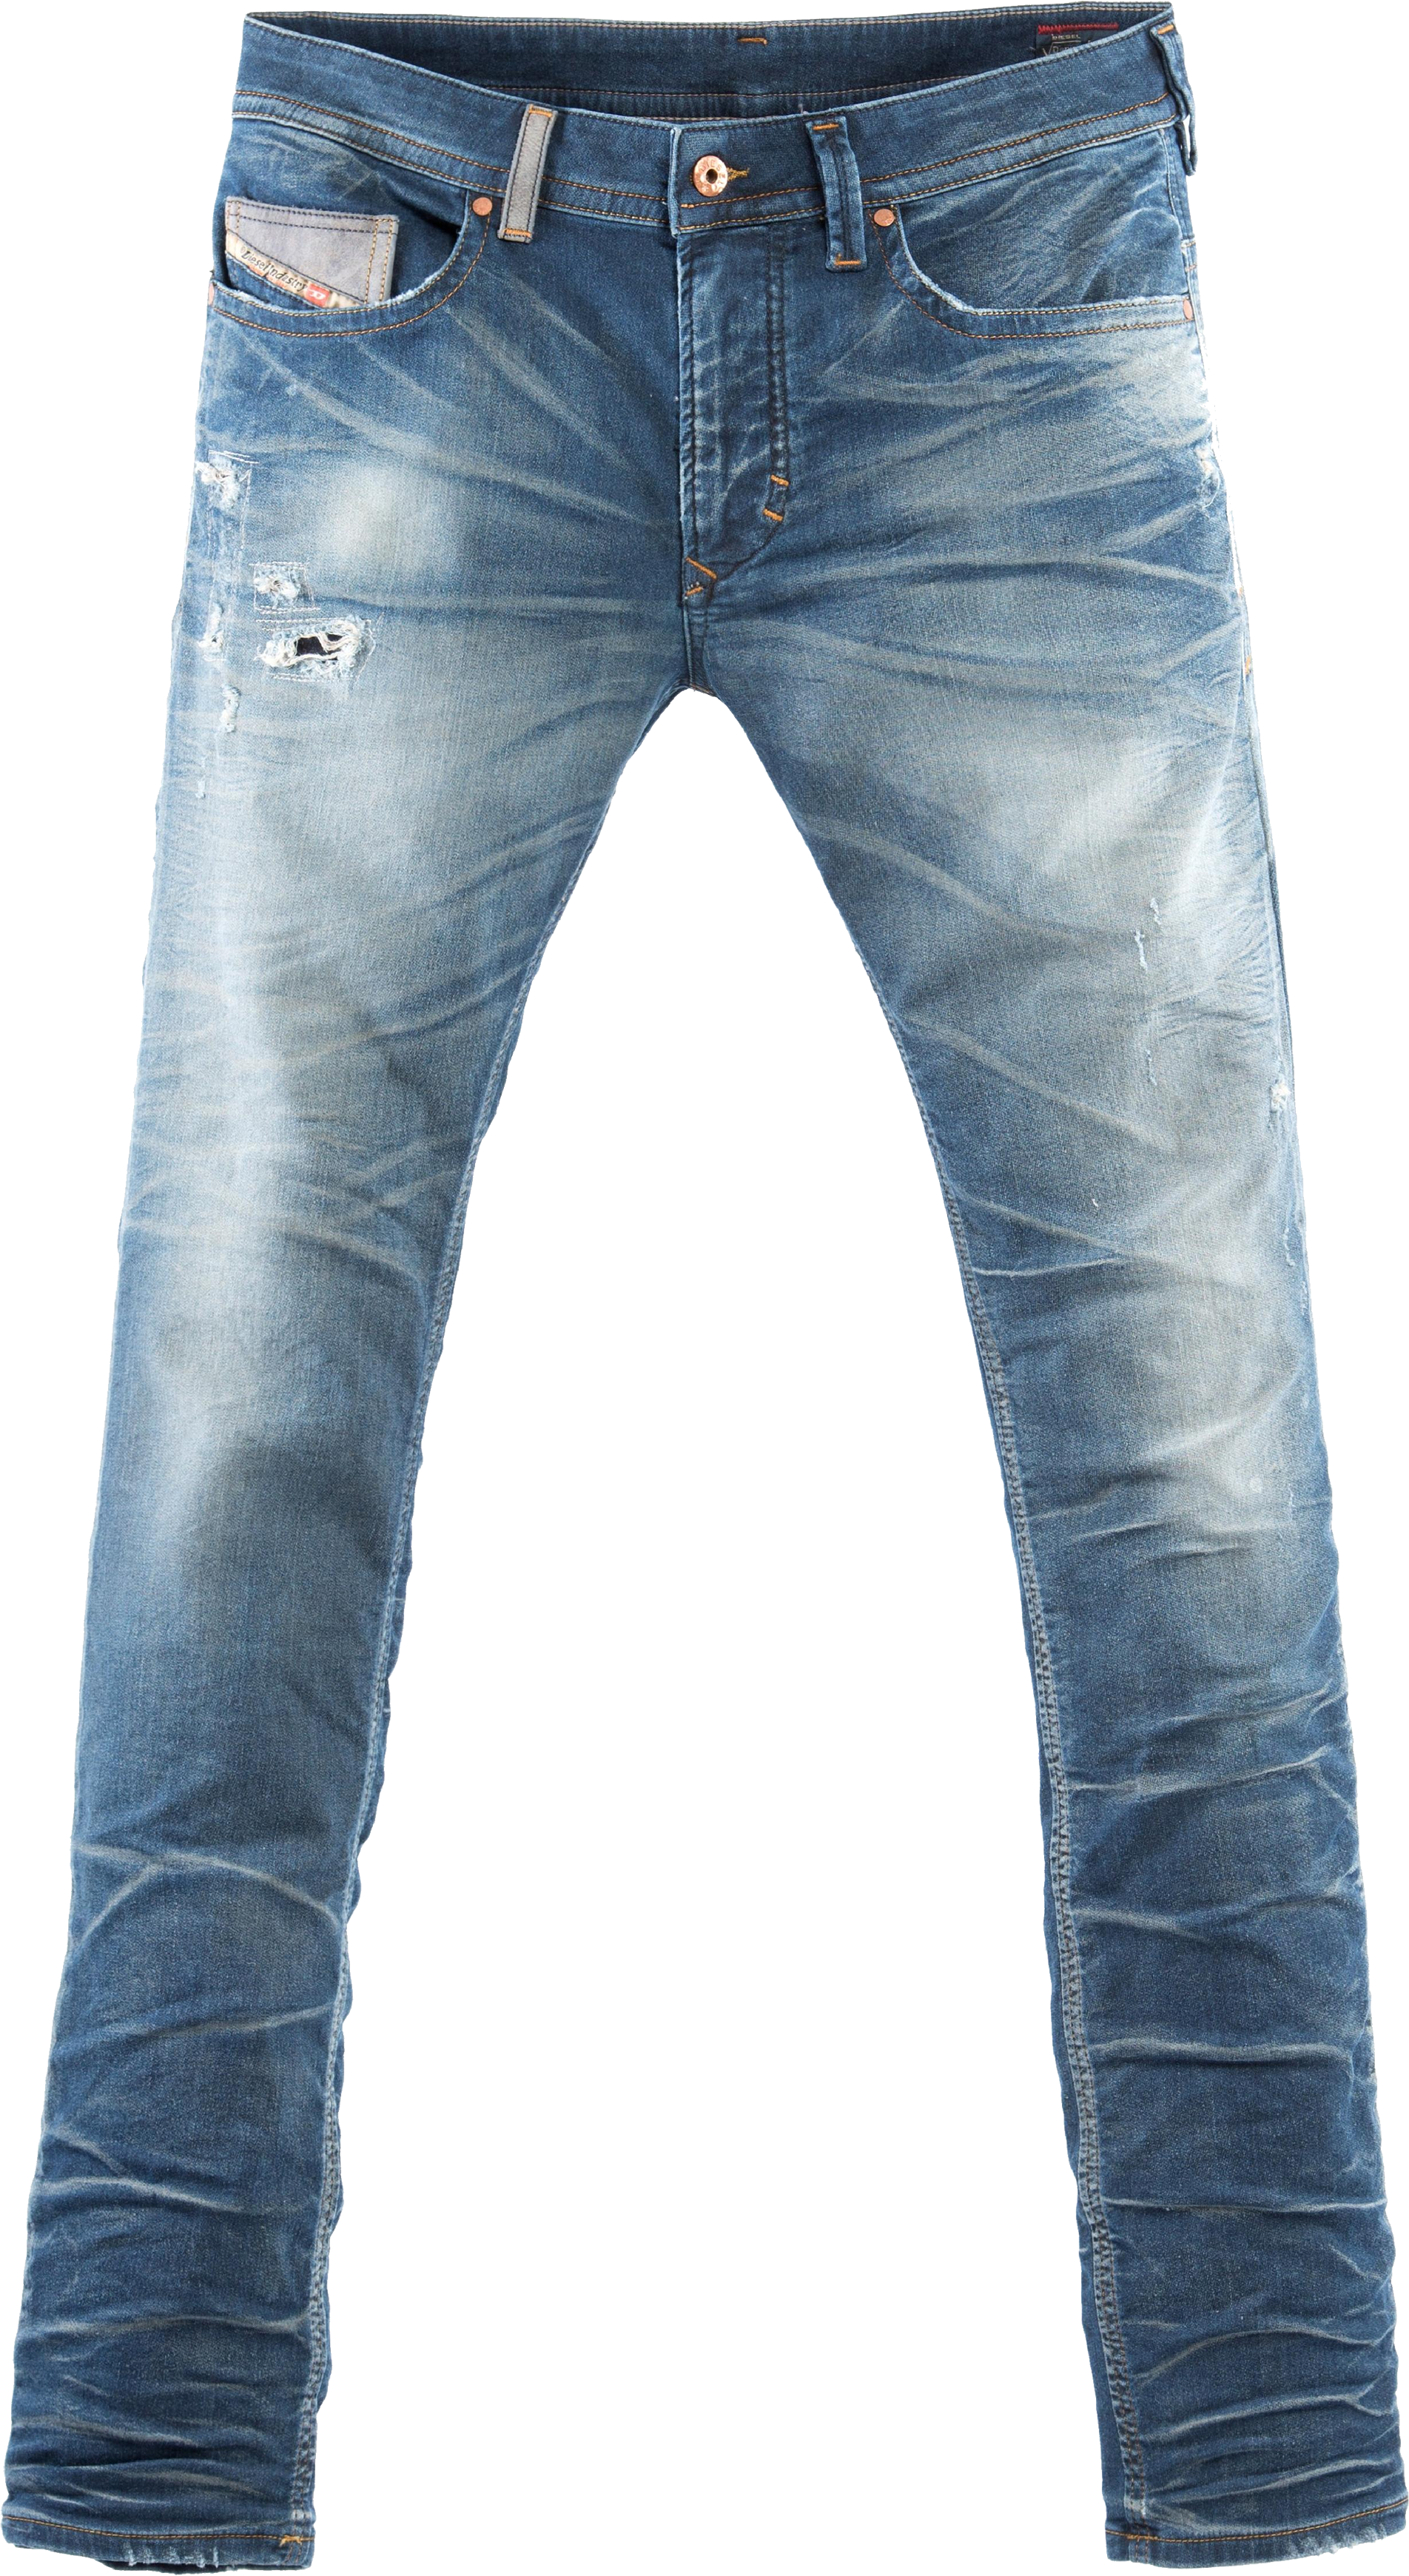 Jeans PNG - 16035